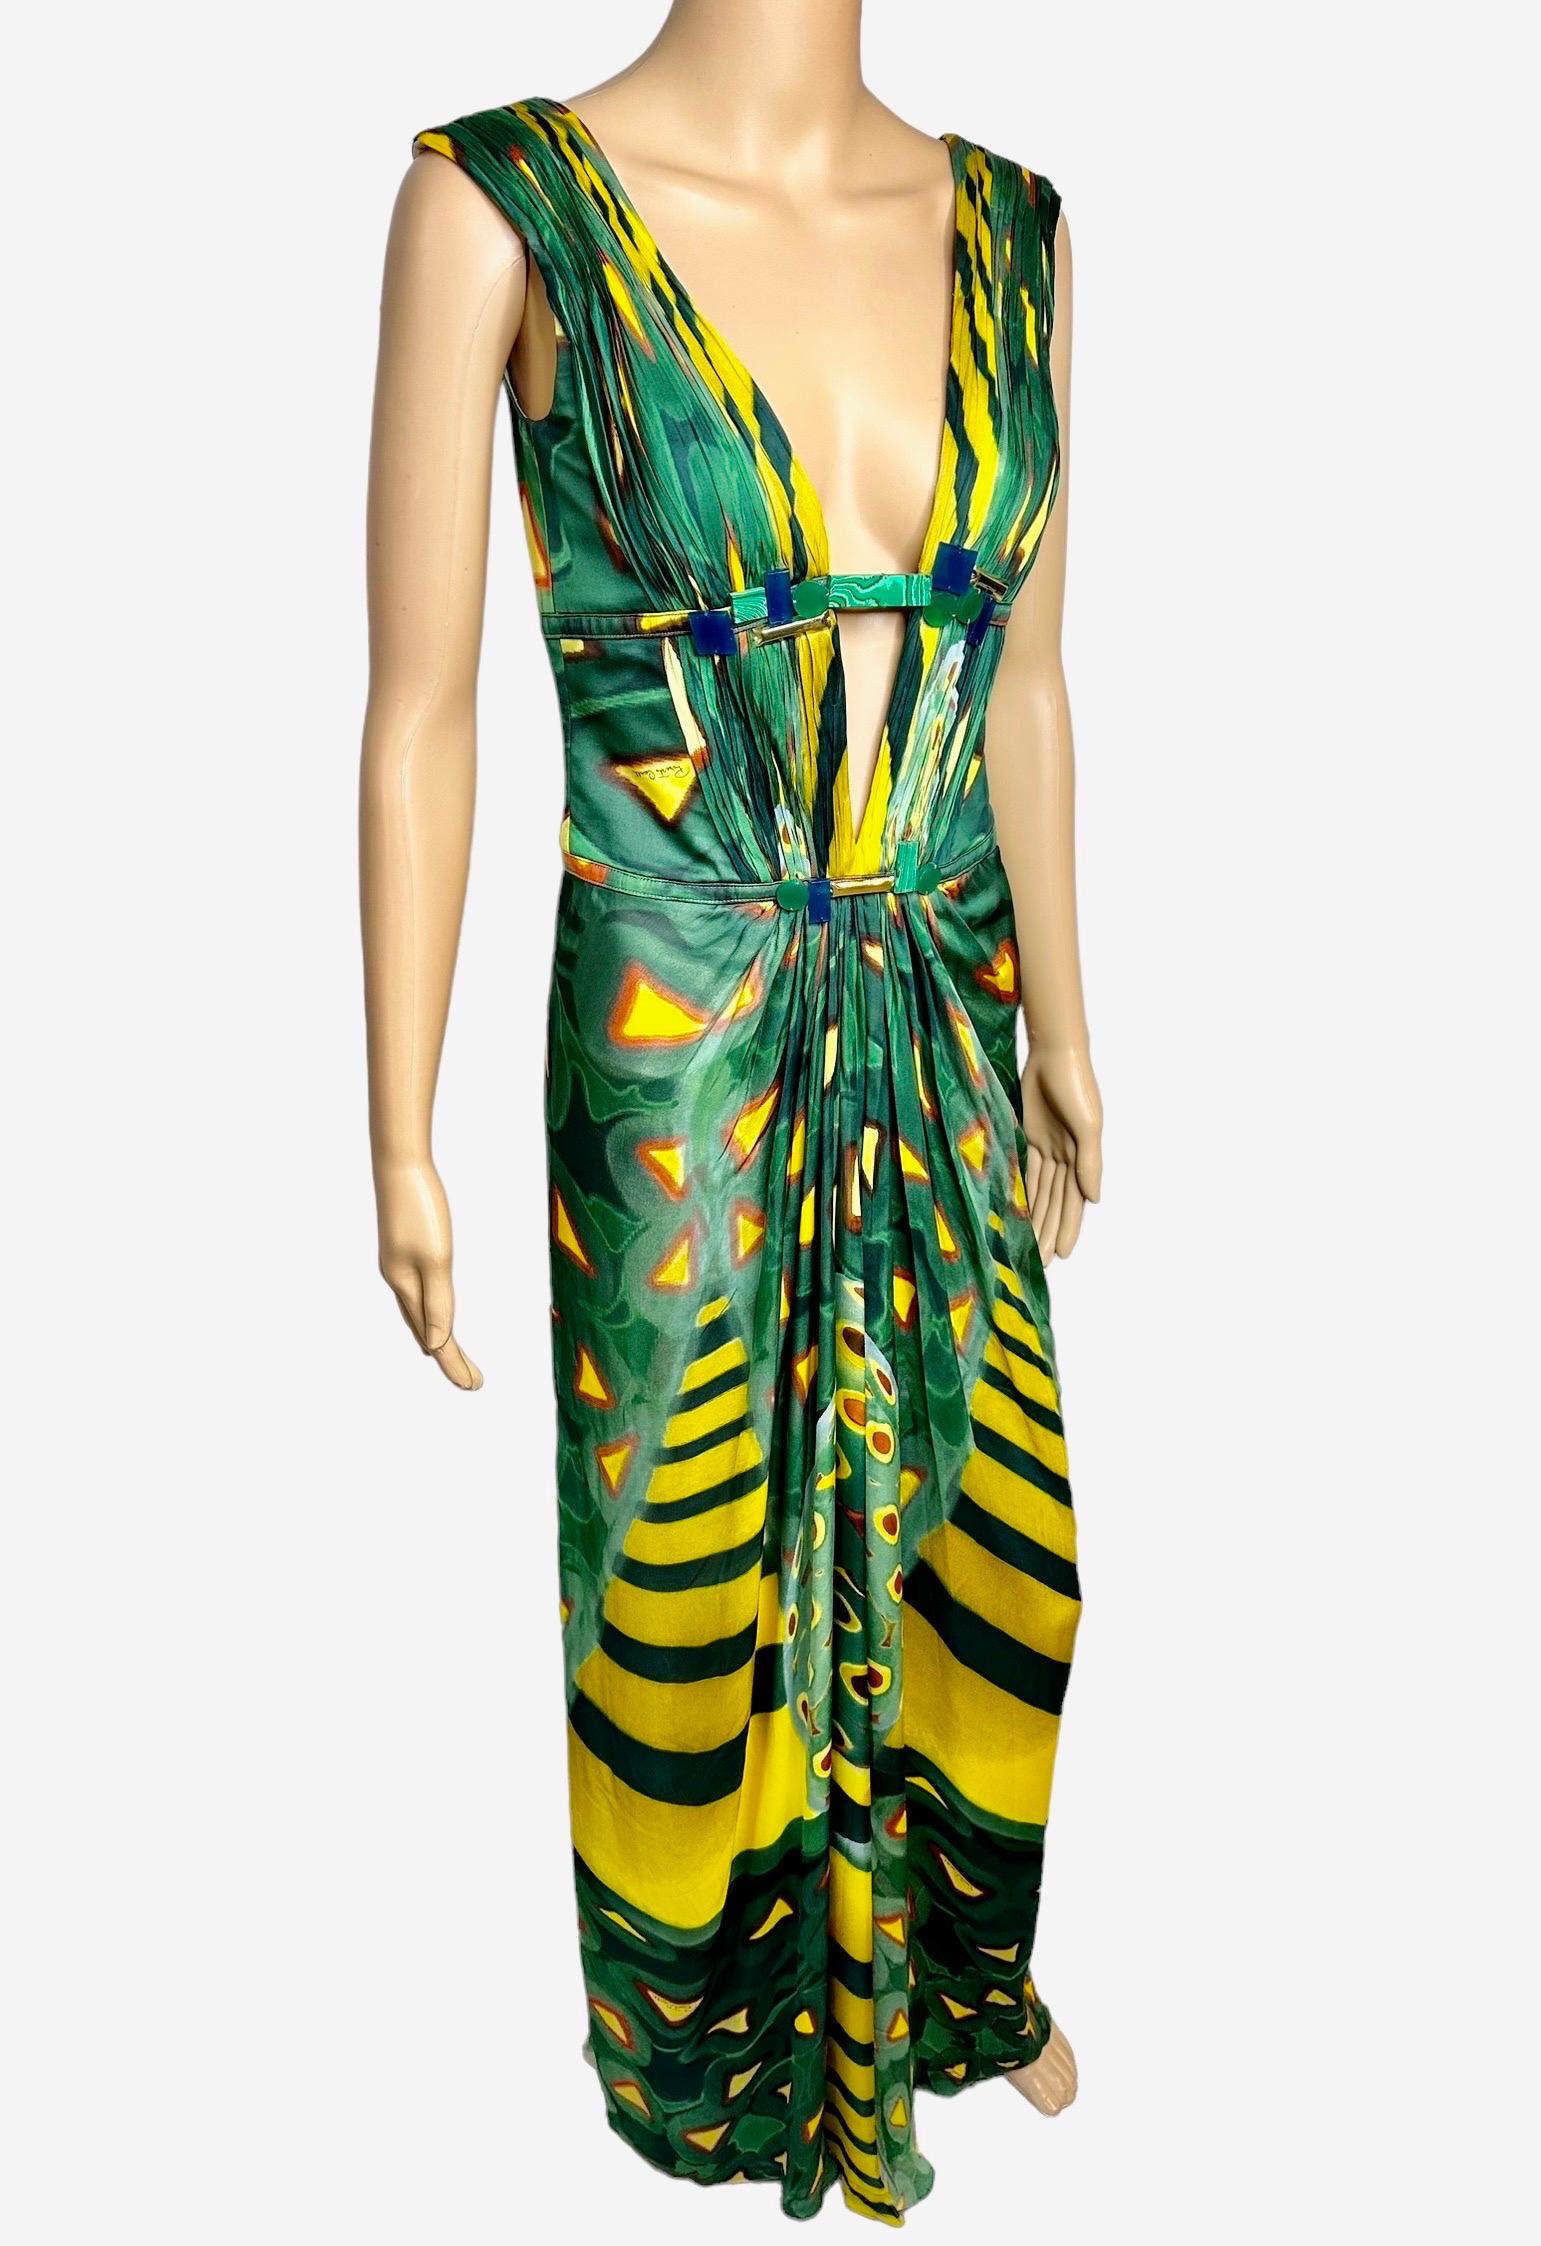 Roberto Cavalli S/S 2009 Plunging Neckline Open Back Evening Dress Gown In Good Condition For Sale In Naples, FL